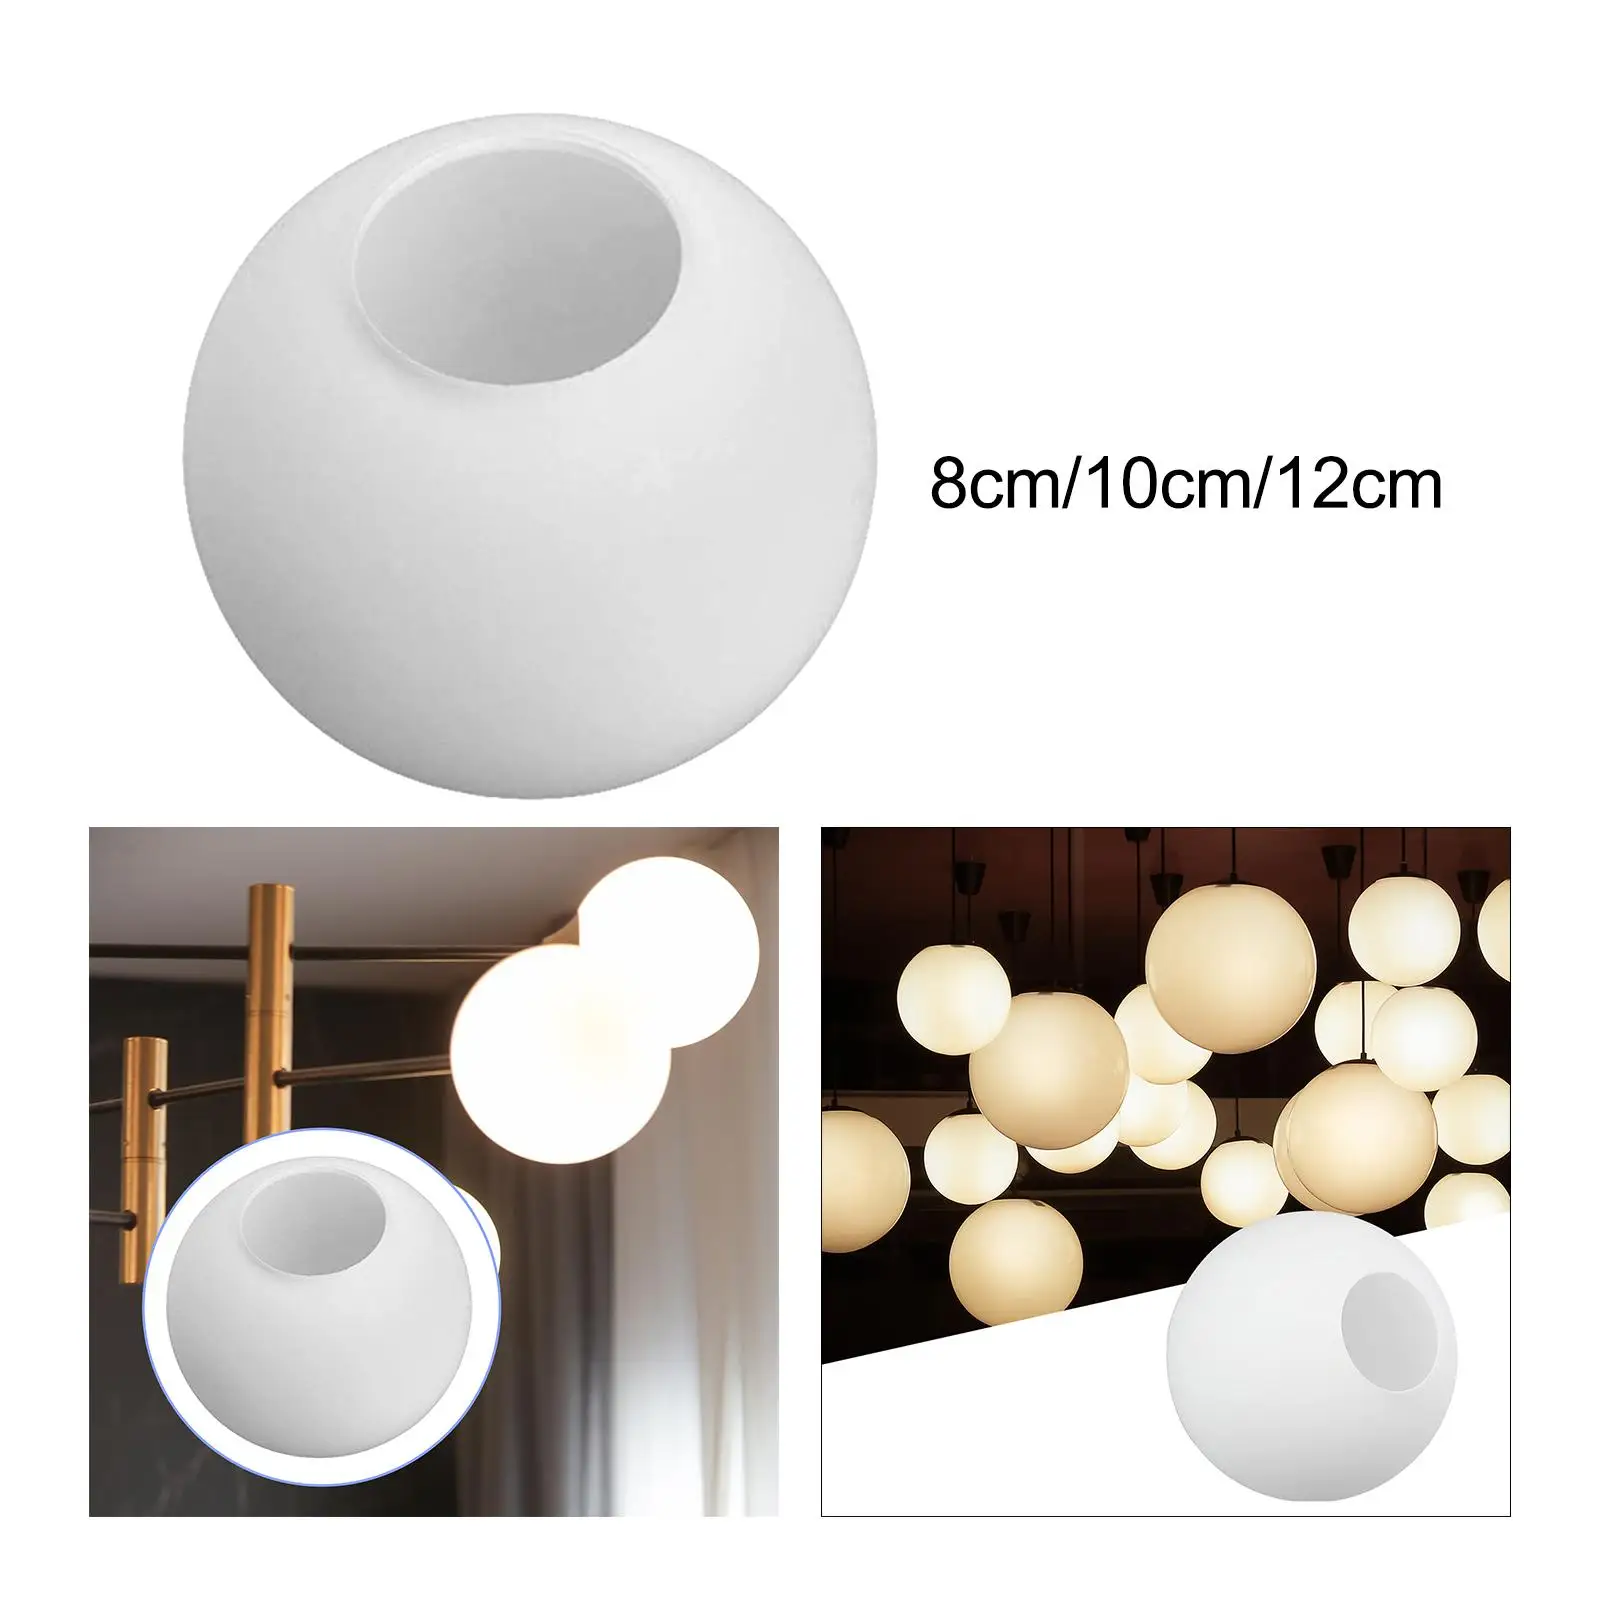 Frosted Glass Lamp Shade Chandelier Hanging Light Cover Round Fixture Cover for Teahouse Kitchen Dining Room Hotel Office